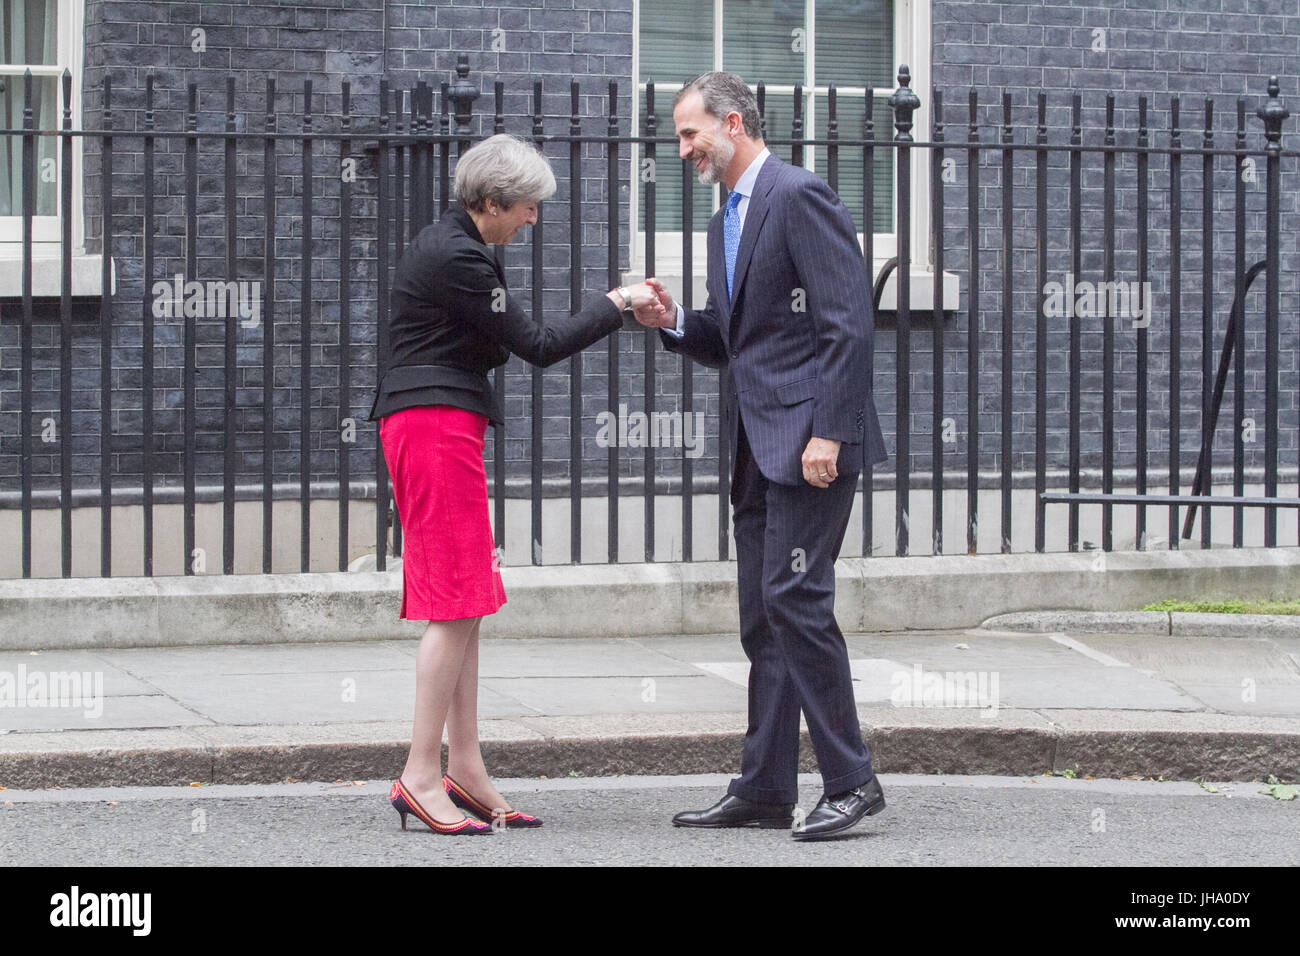 London, UK. 13th July, 2017. The King of Spain Felipe VI is welcomed at No 10 Downing Street by British Prime Minister Theresa May during his state visit to Britain Credit: amer ghazzal/Alamy Live News Stock Photo